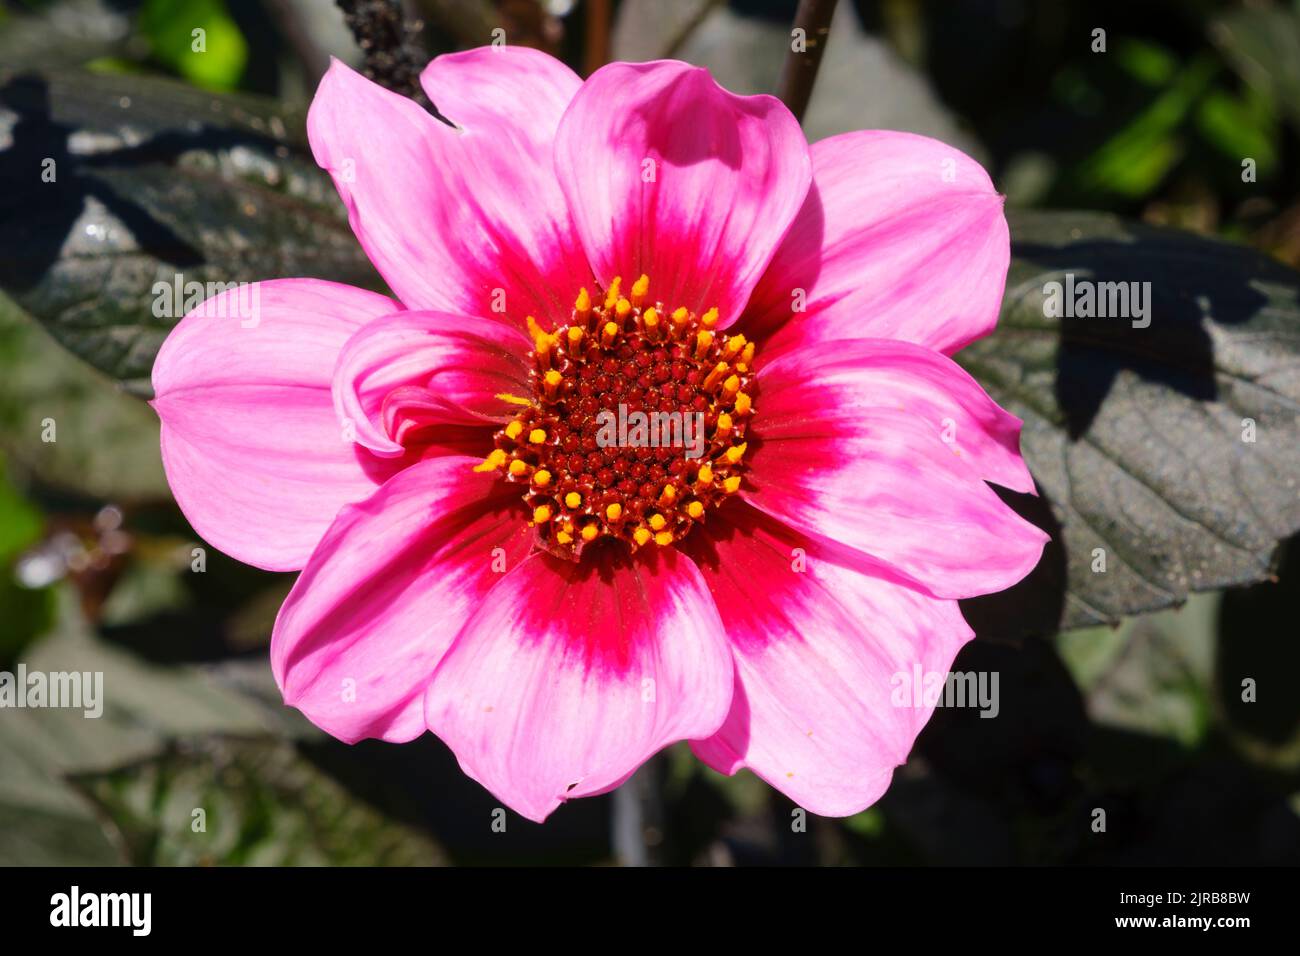 Head of pink blooming dahlia flower Stock Photo